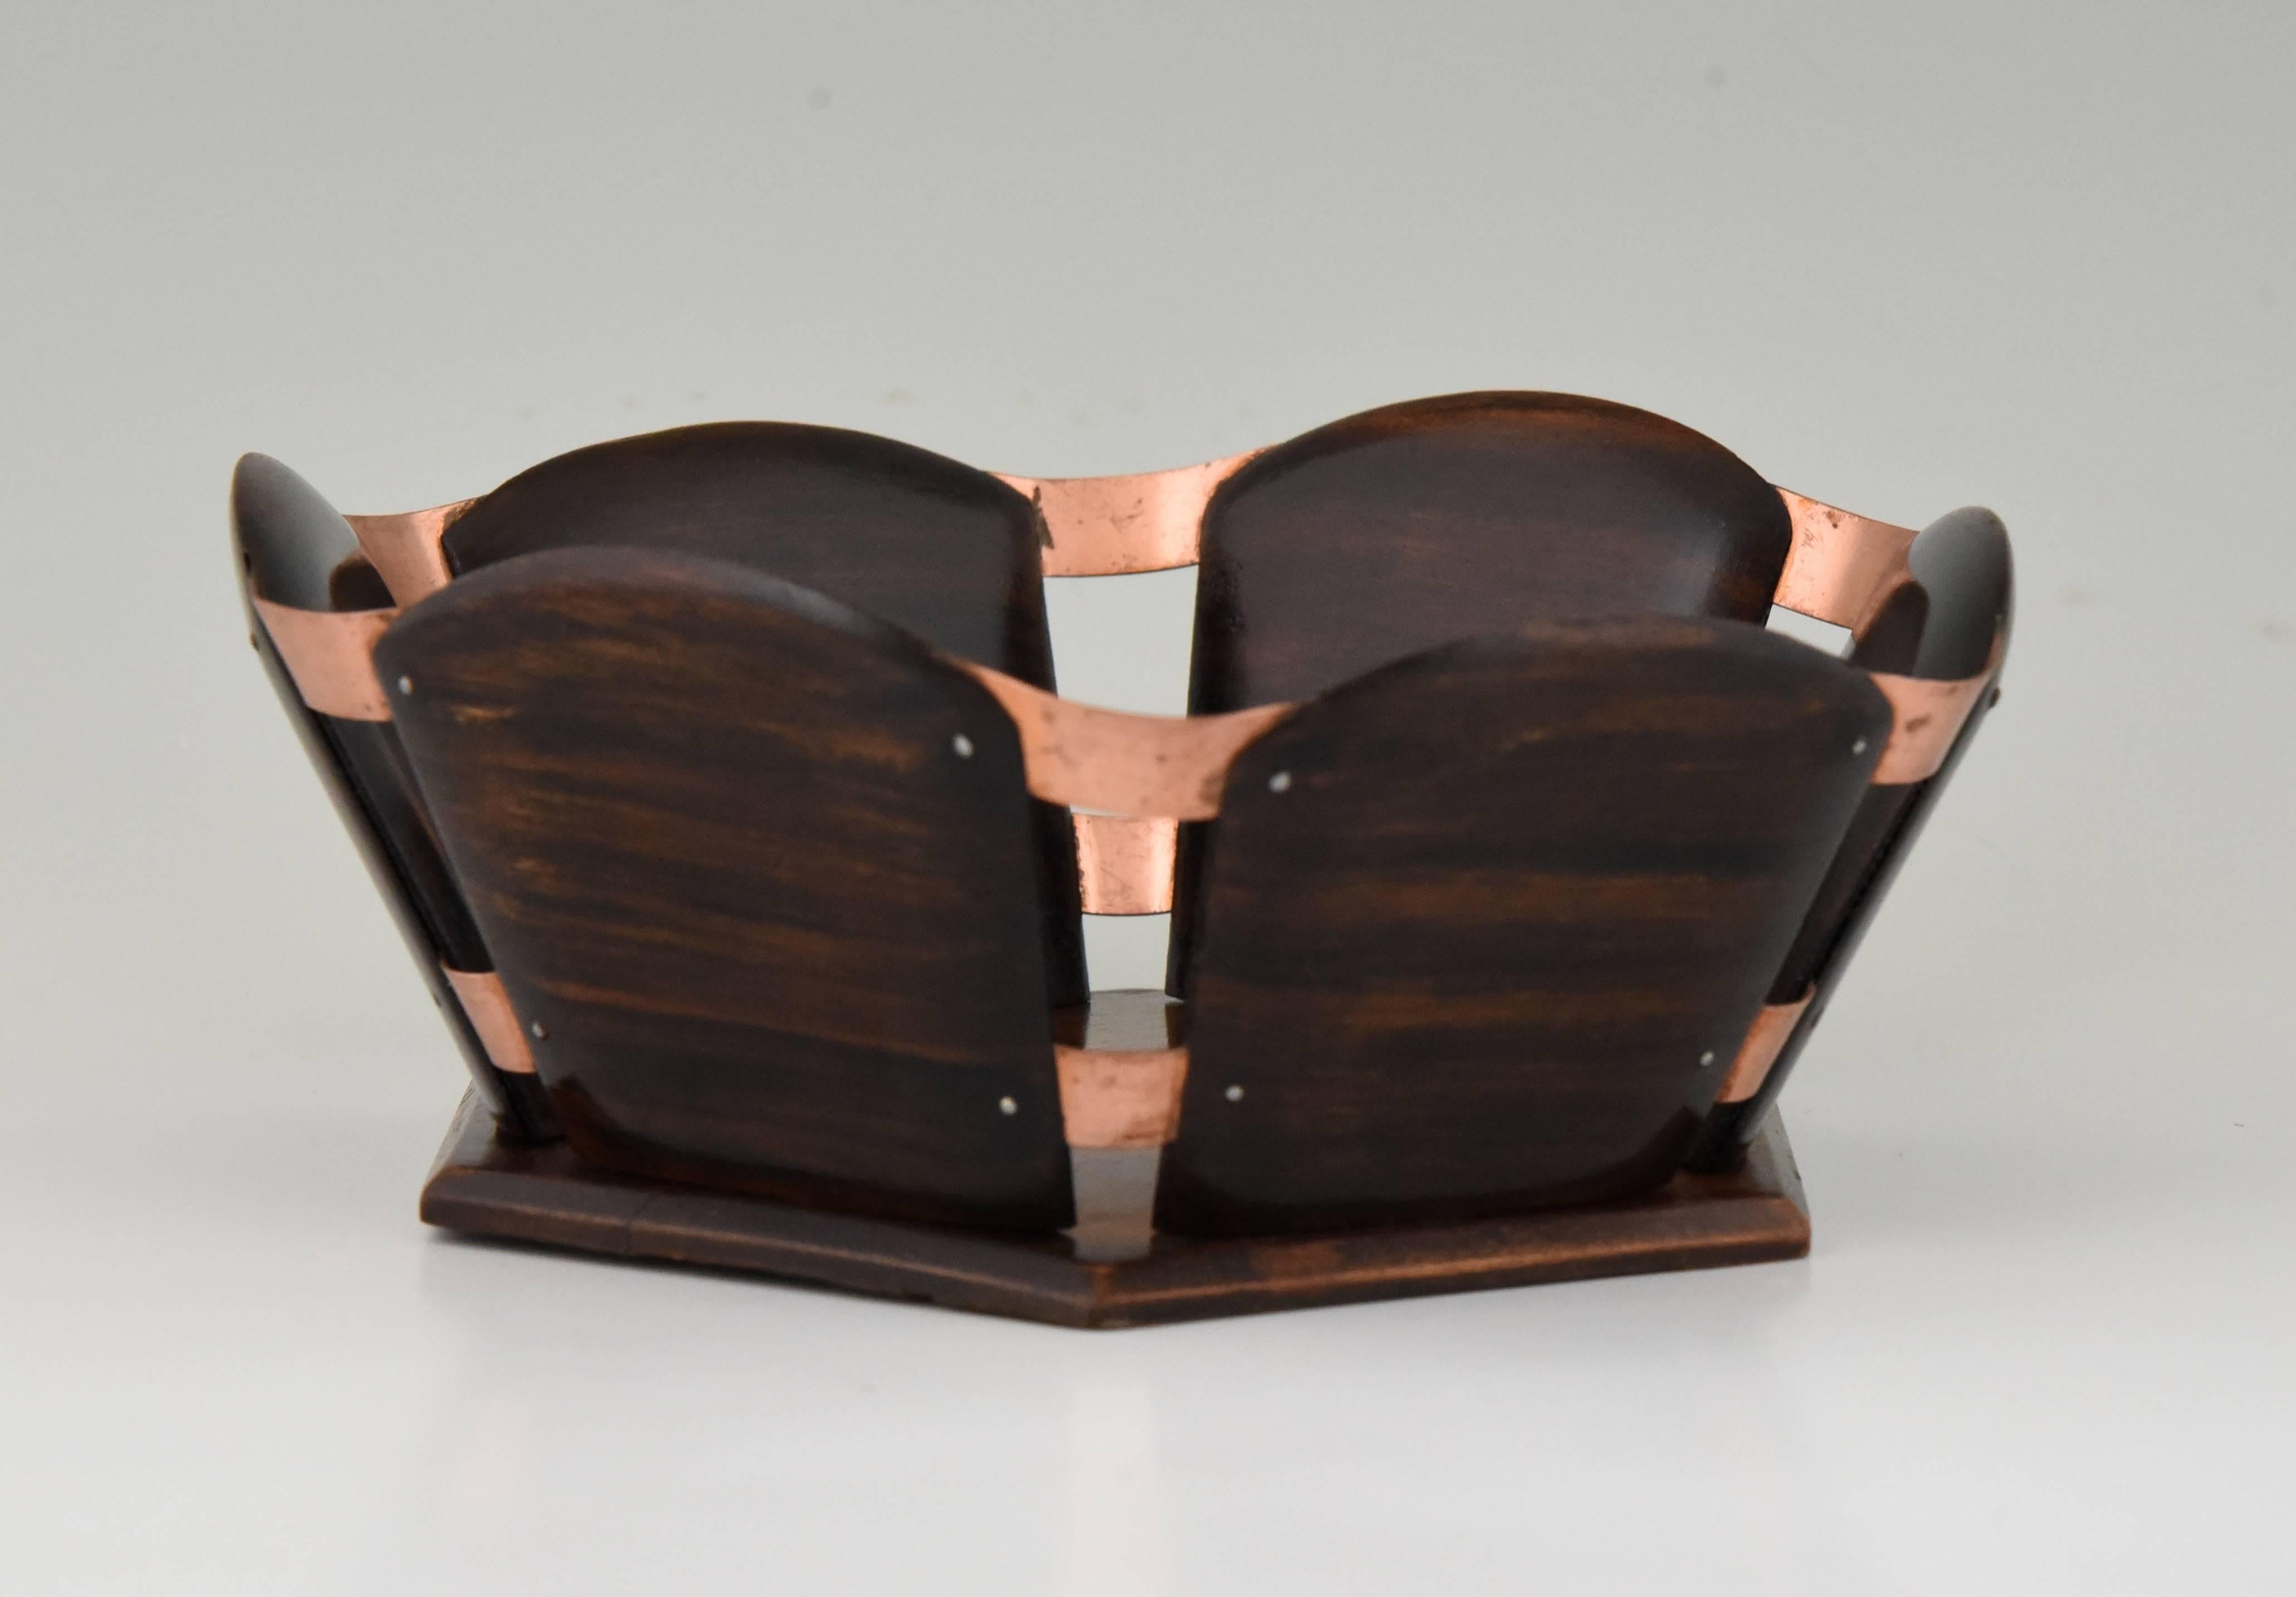 Signature/ Marks: Original label from a decorator in Paris
Style: Art Deco
Date: 1930
Material: Wood and copper.
Origin: France
Size: H. 8 cm x L. 20.5 cm. x W. 19.5 cm.  
H. 3.2 inch x L. 8 inch x W. 7.7 inch.
Condition: Very good condition.
